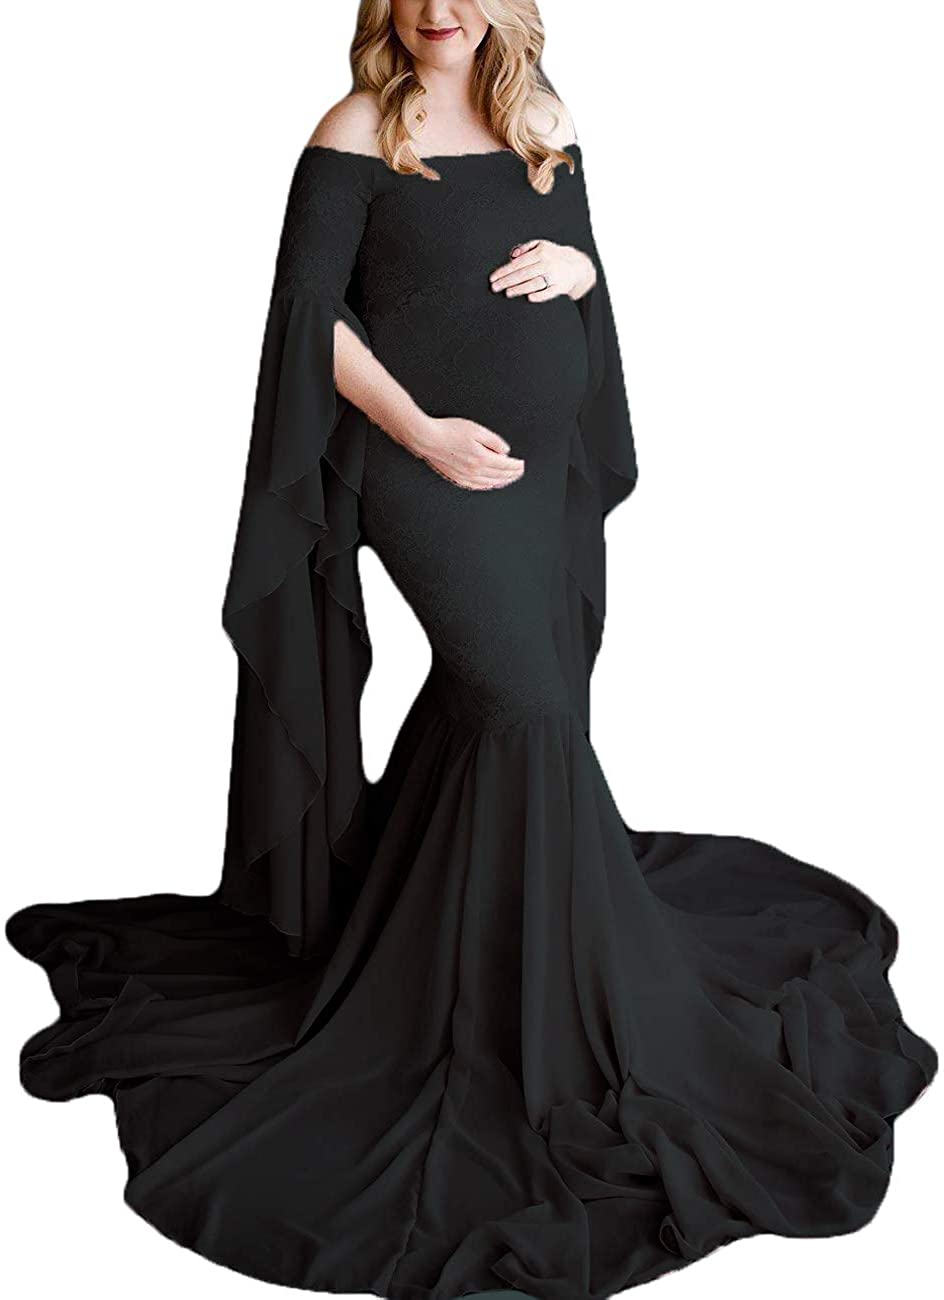  Maternity Gown for Photoshoot